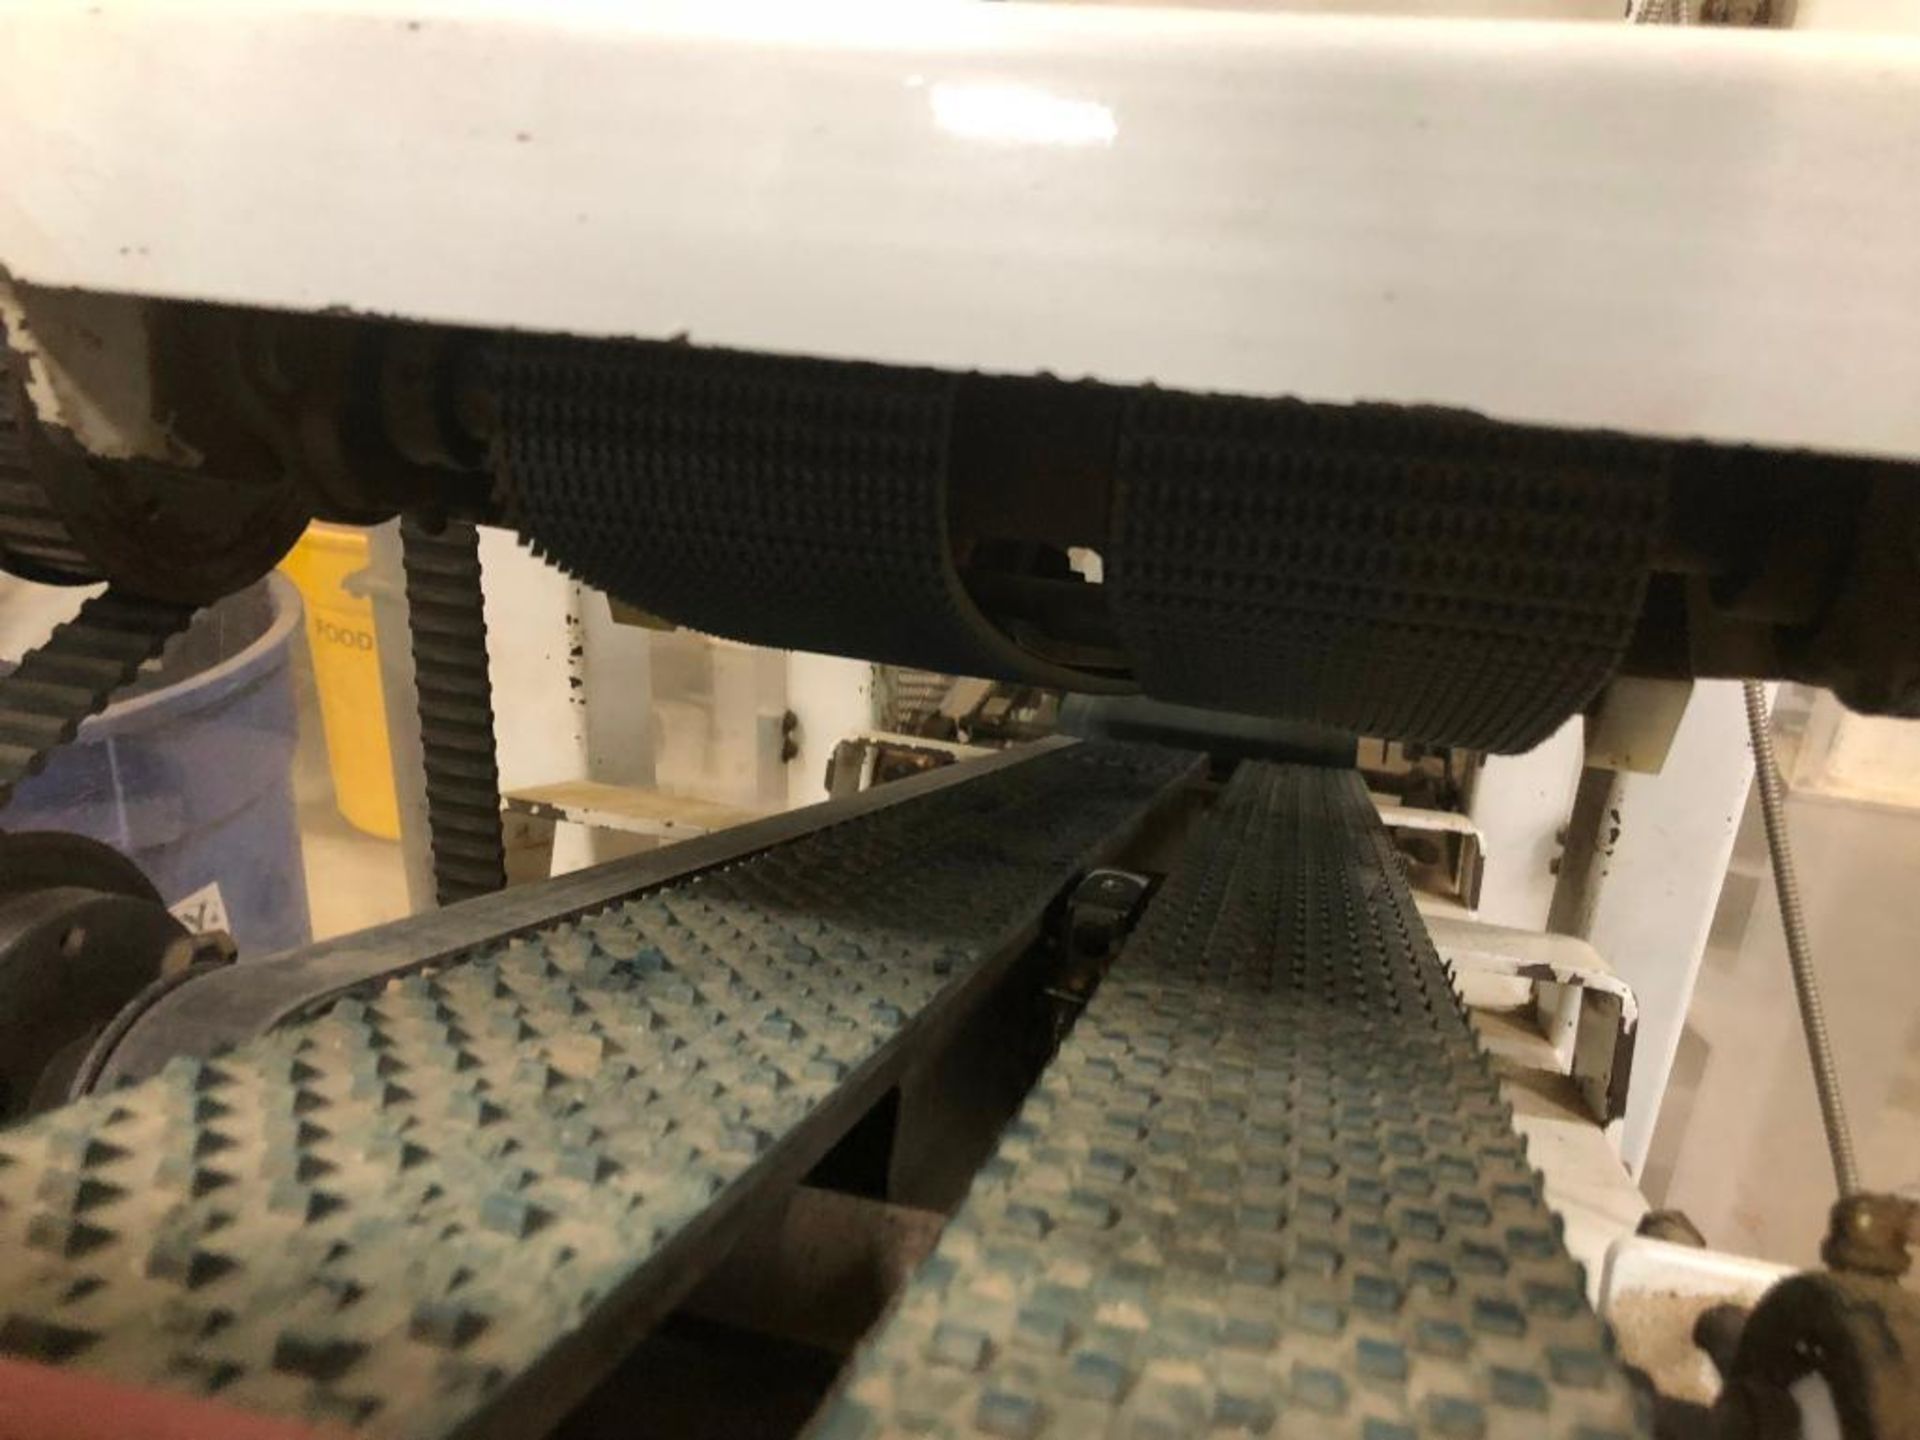 Blue Print Automation incline belt conveyor {Located in Hanover, PA} - Image 4 of 6